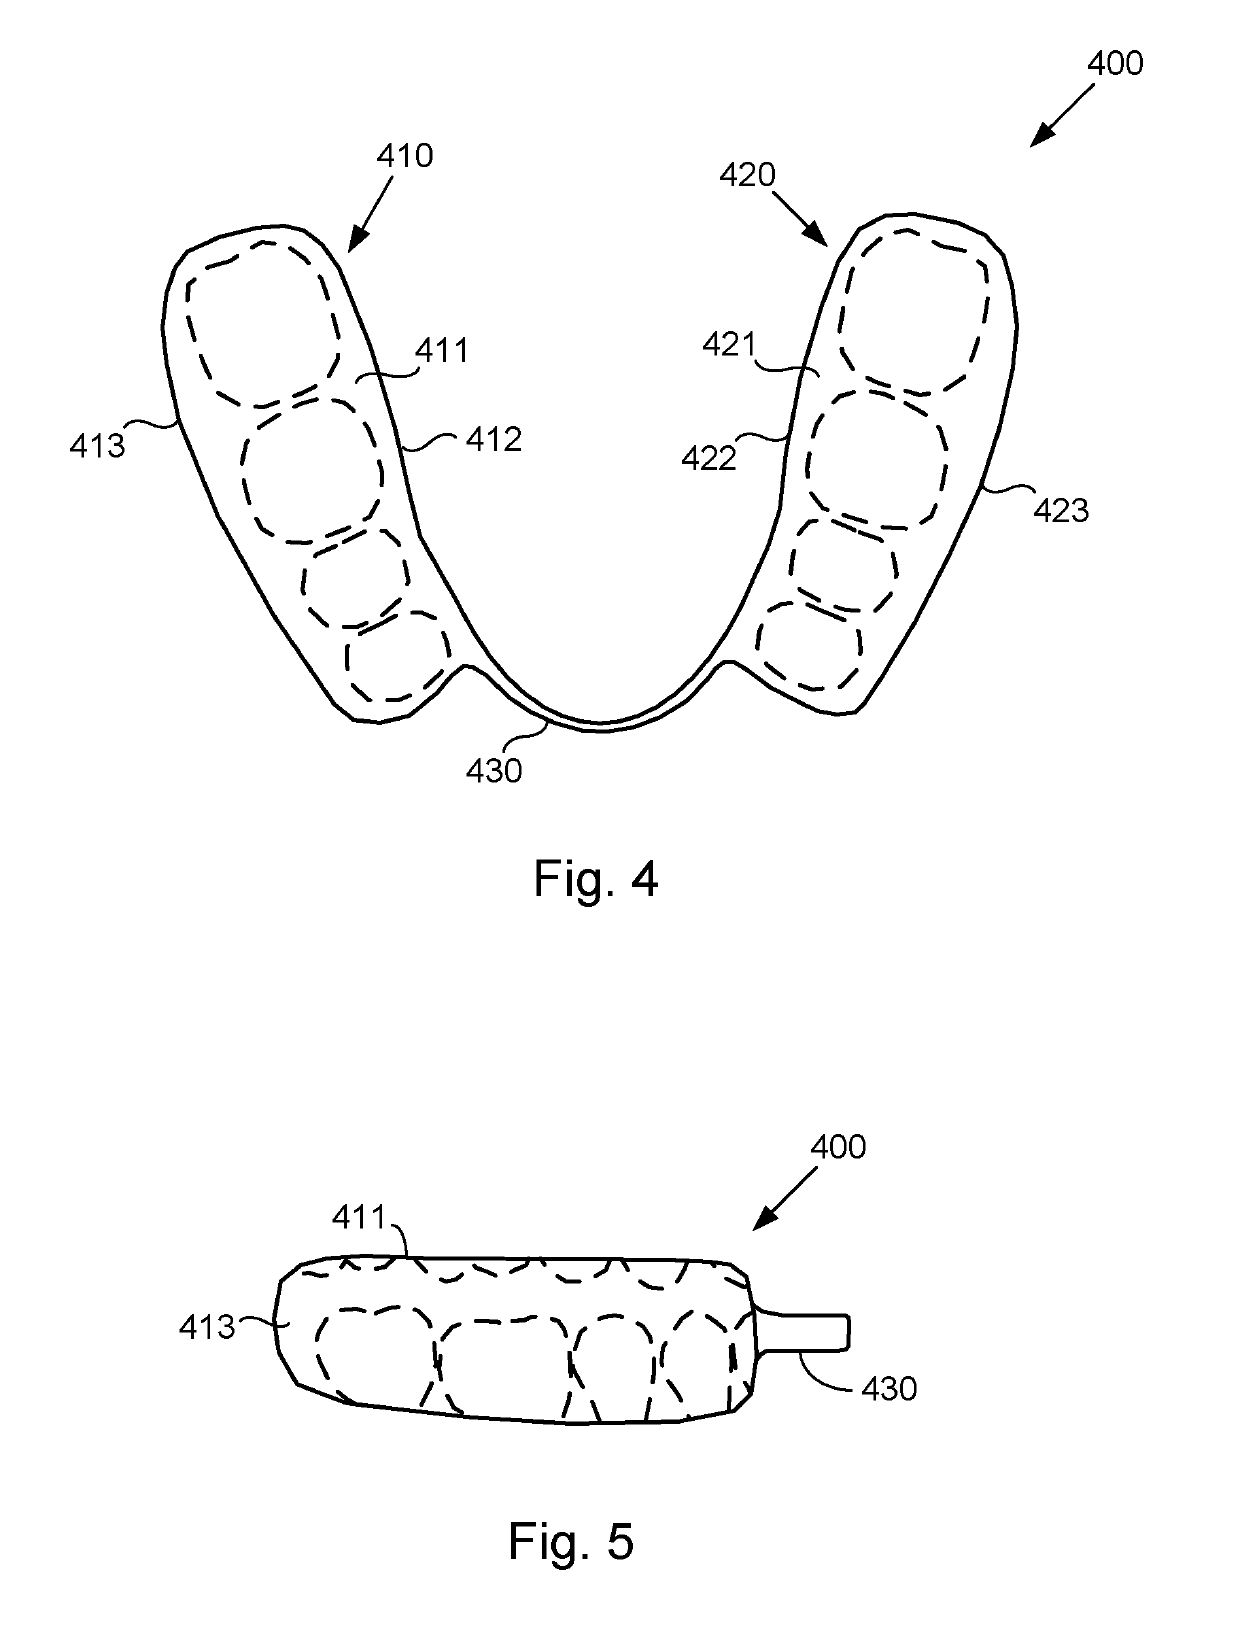 Systems and methods for determining and maintaining an orthopedically optimized Cranio-cervical/Cranio-mandibular position